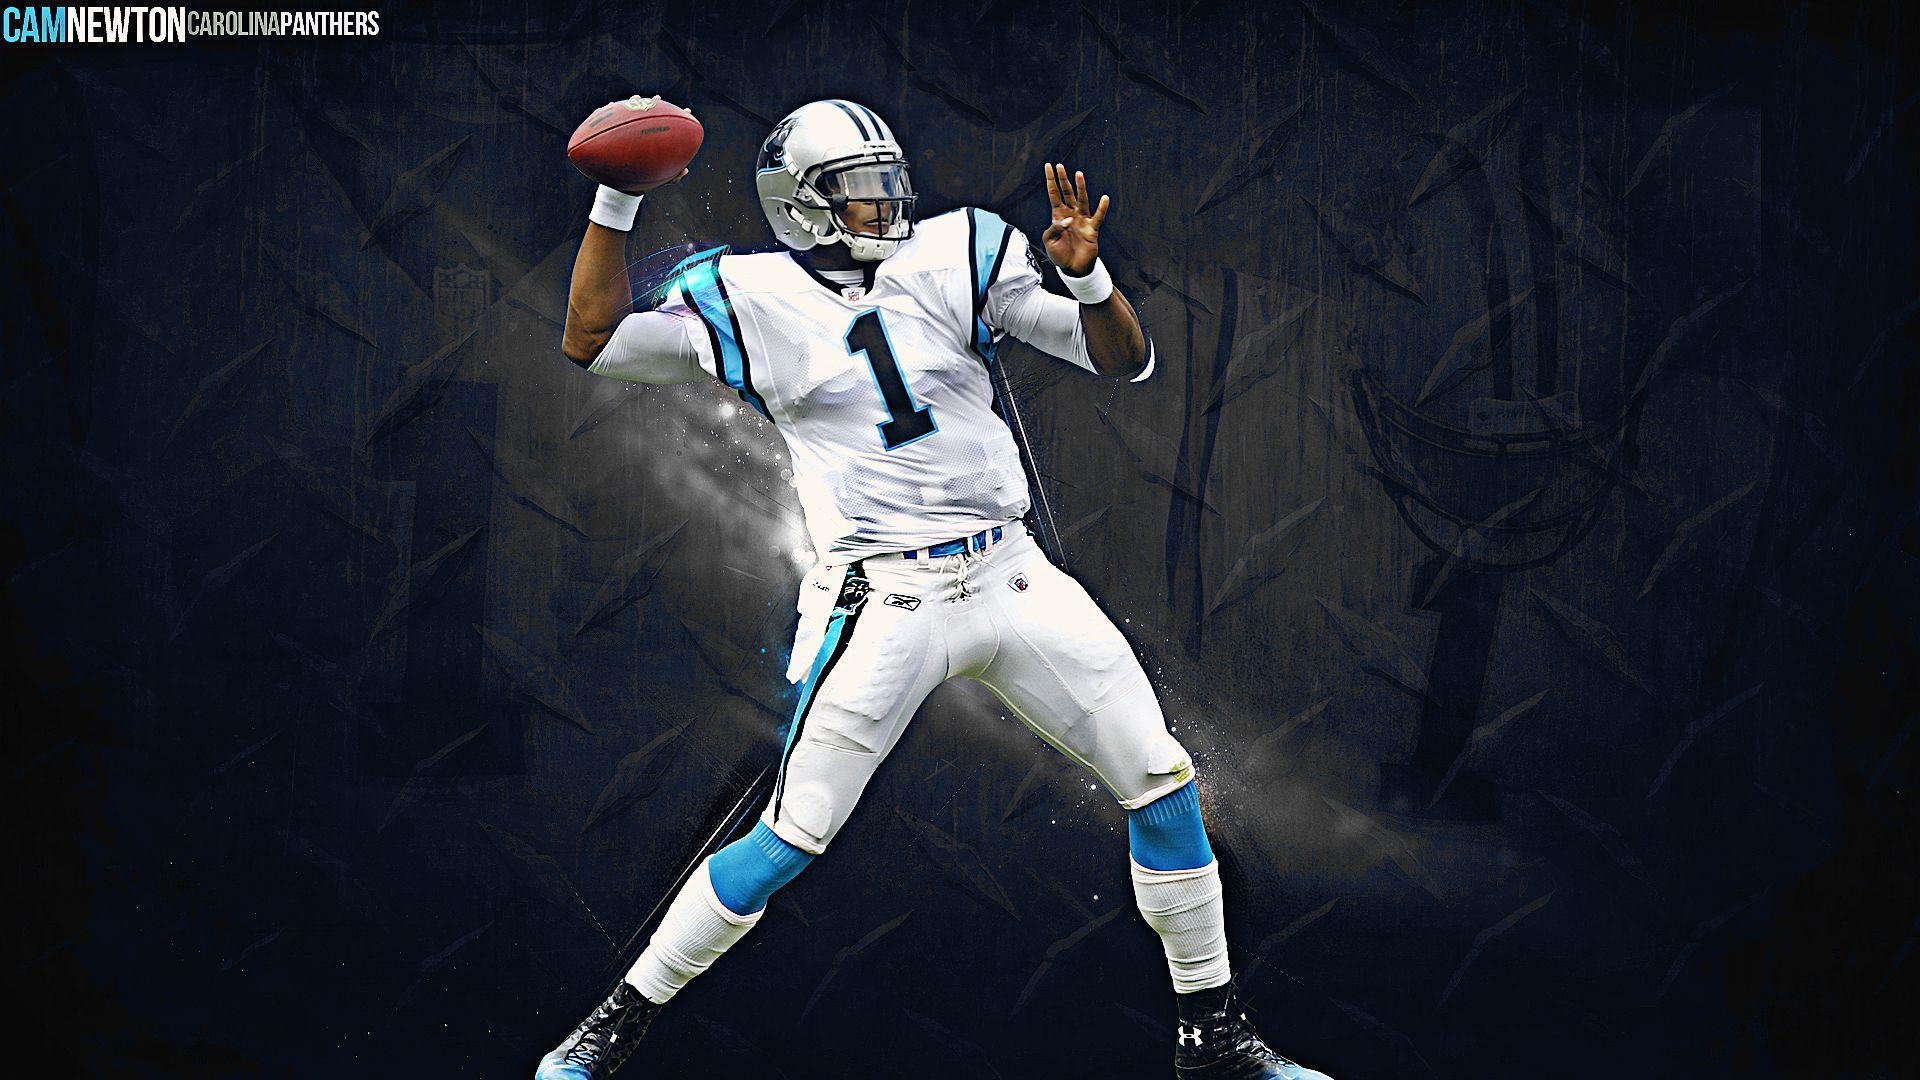 1920x1080 Cam Newton Wallpapers High Quality | Download Free